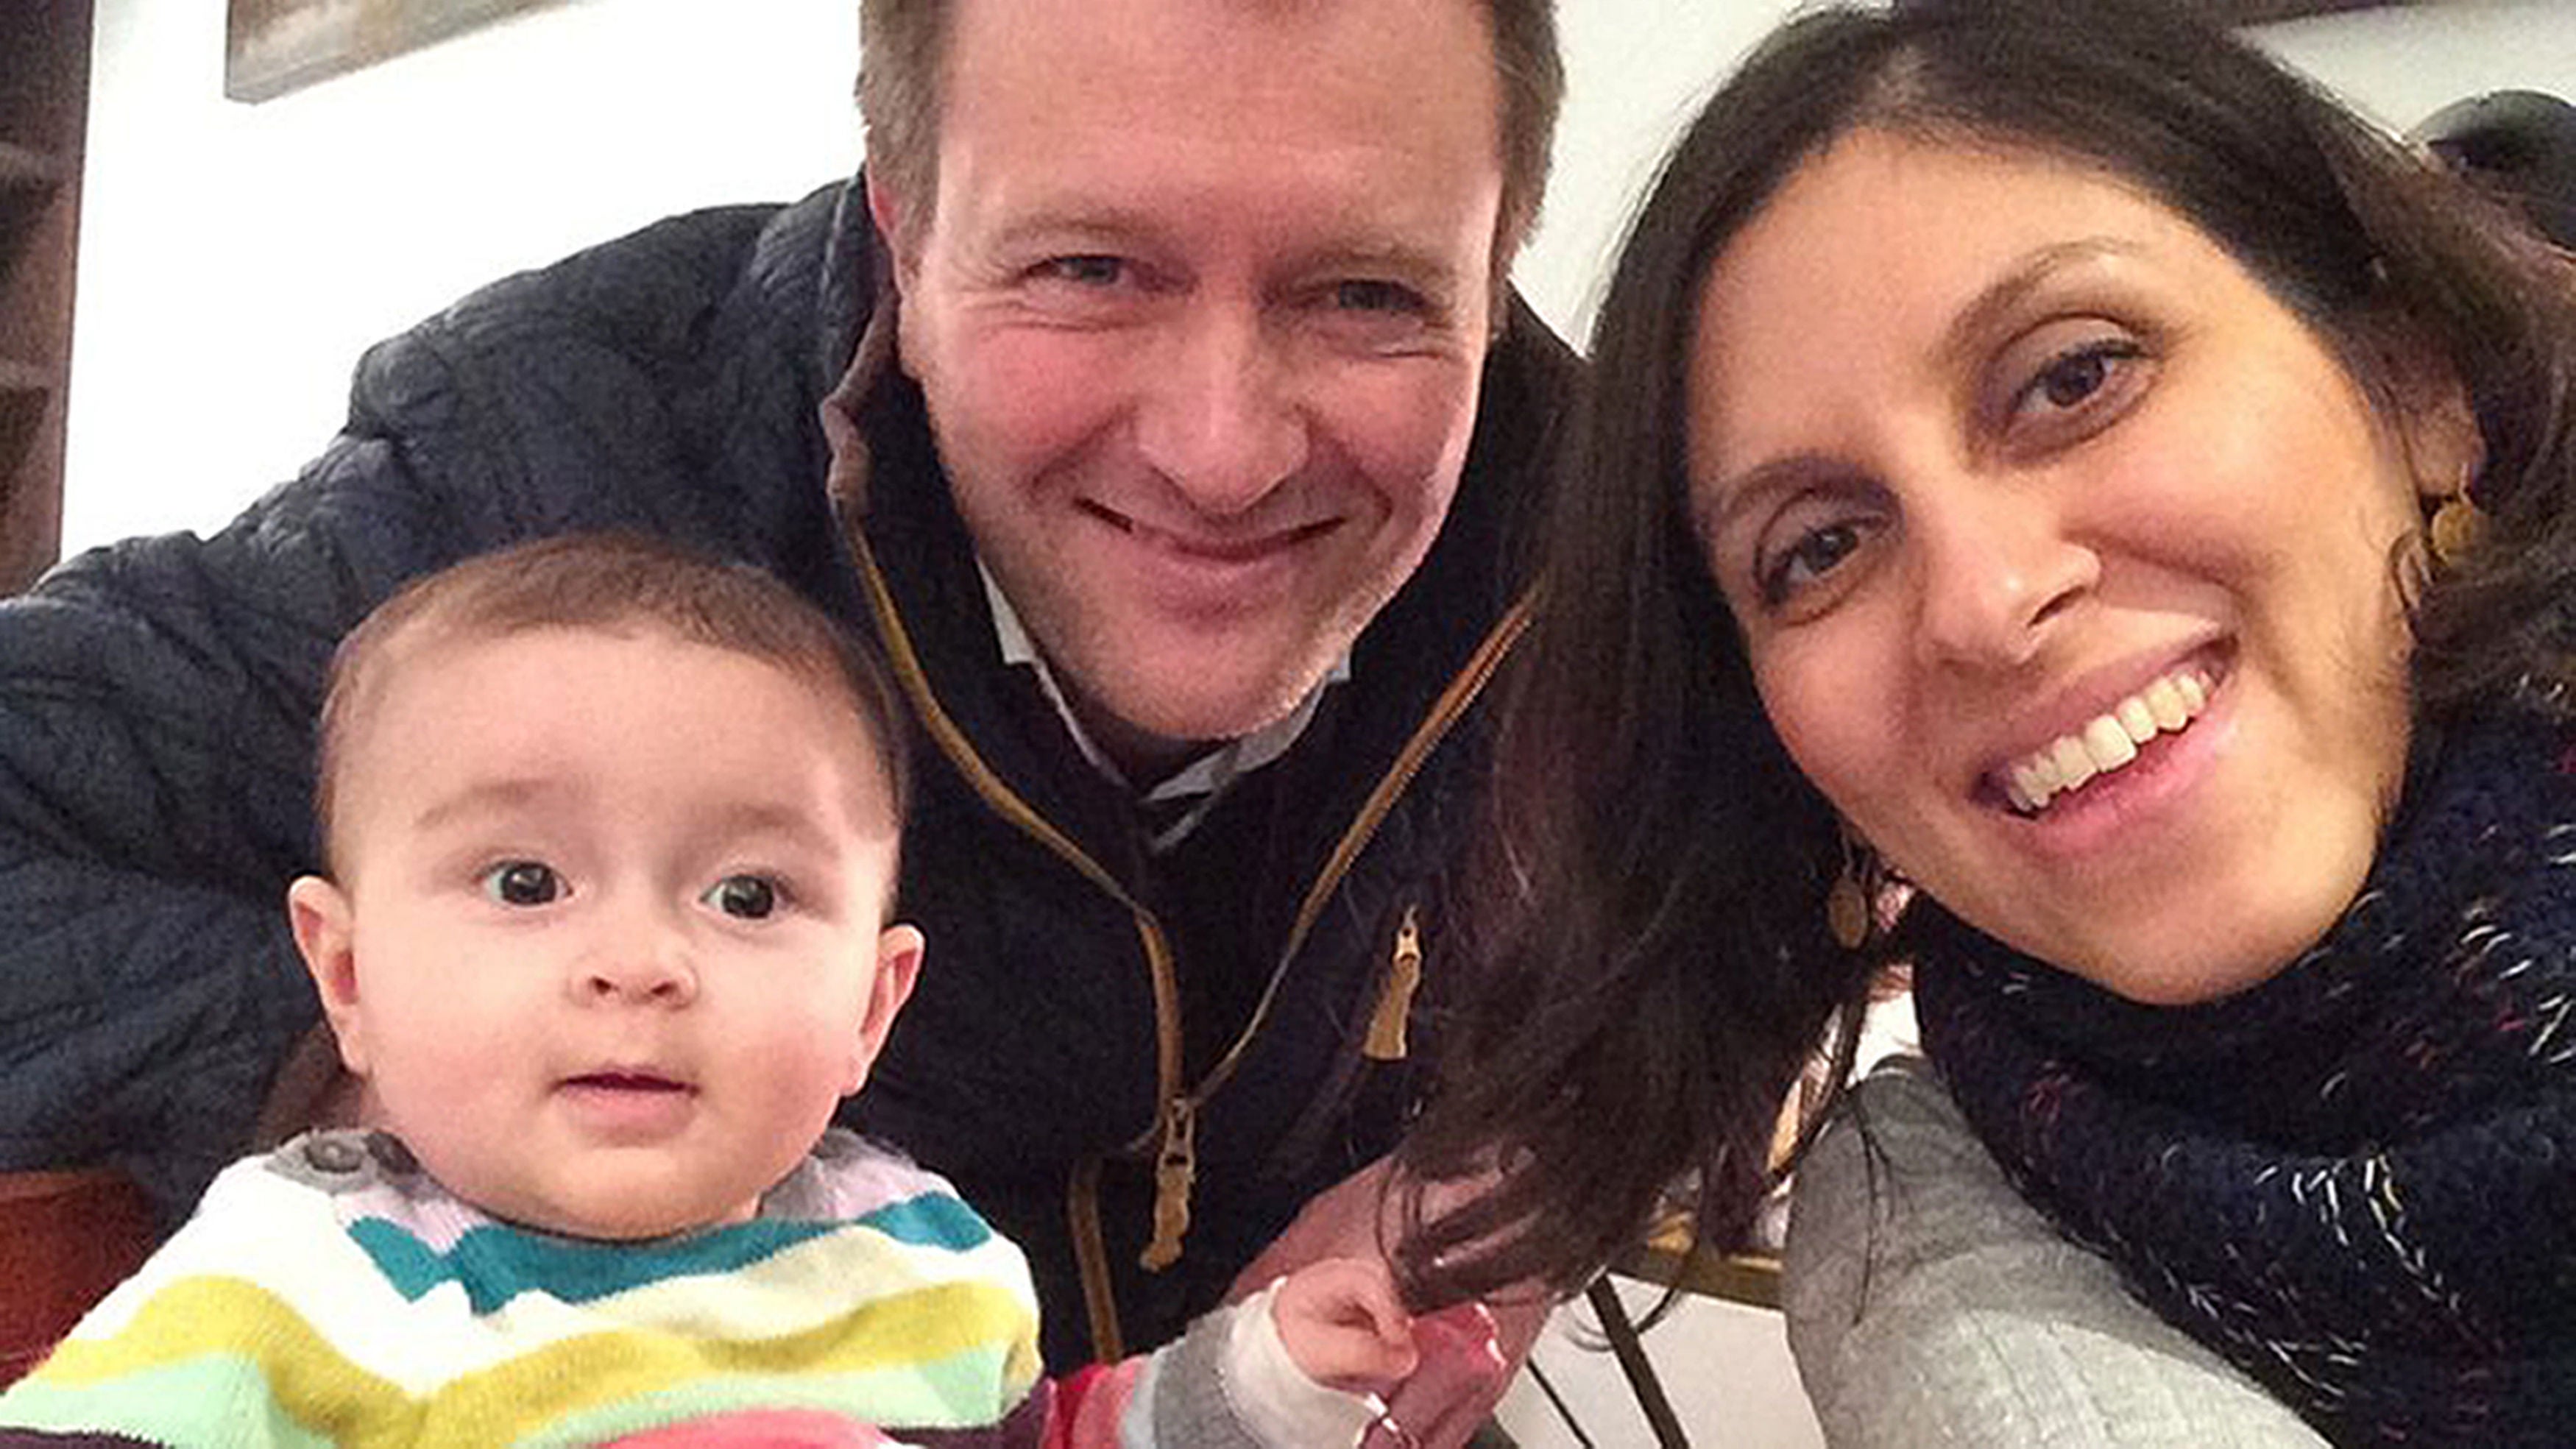 Nazanin with her husband Richard Ratcliffe and their daughter Gabriella (Family Handout/PA)